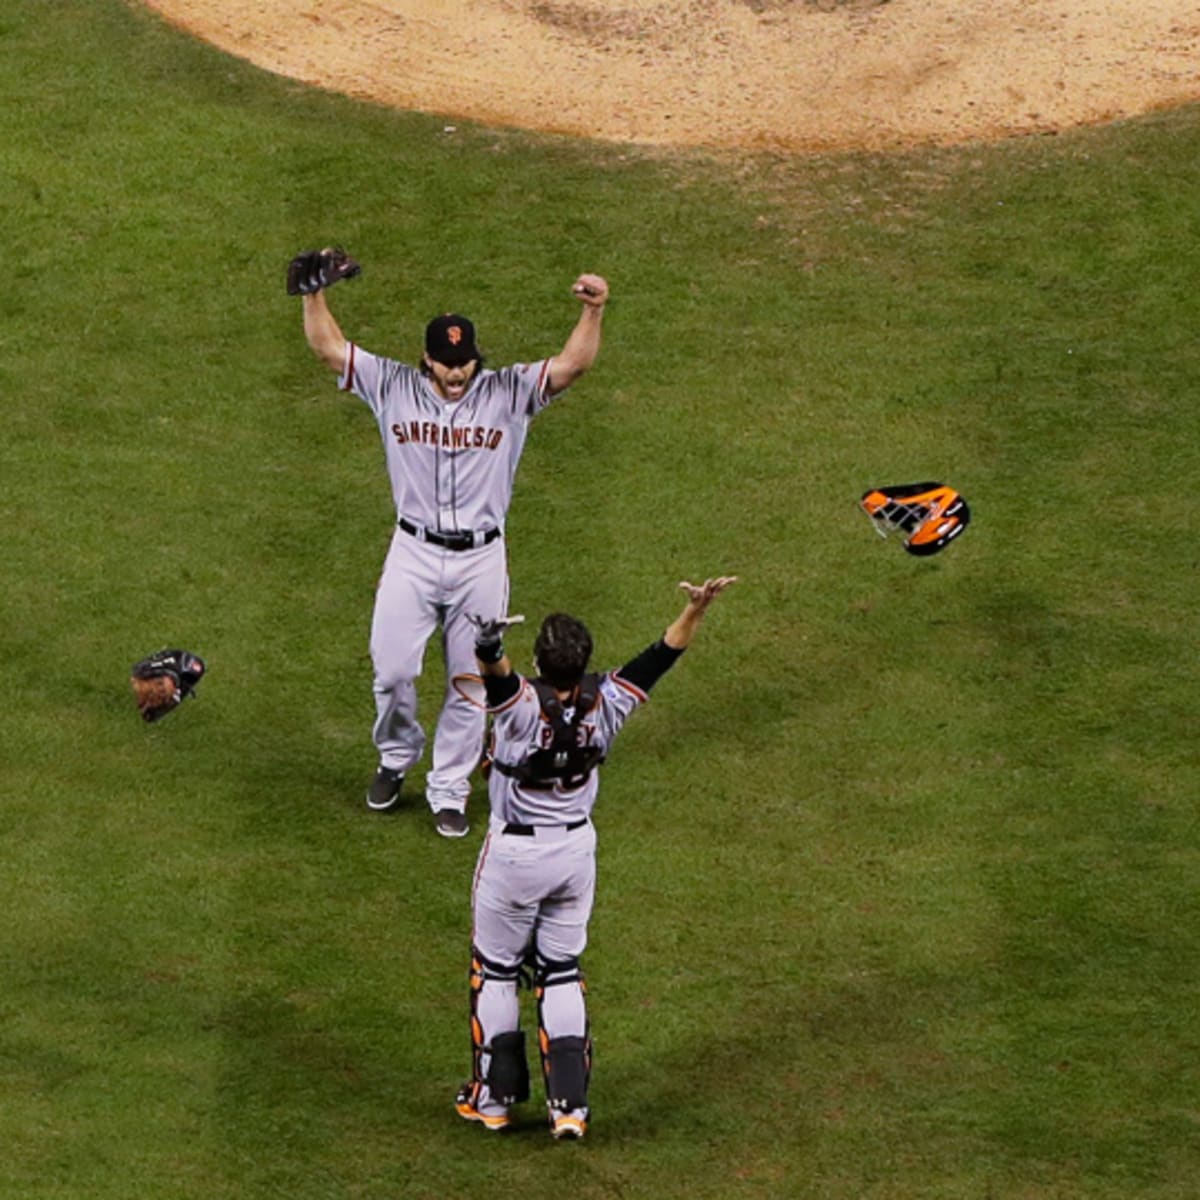 25 pictures of the Giants winning the 2014 World Series - McCovey